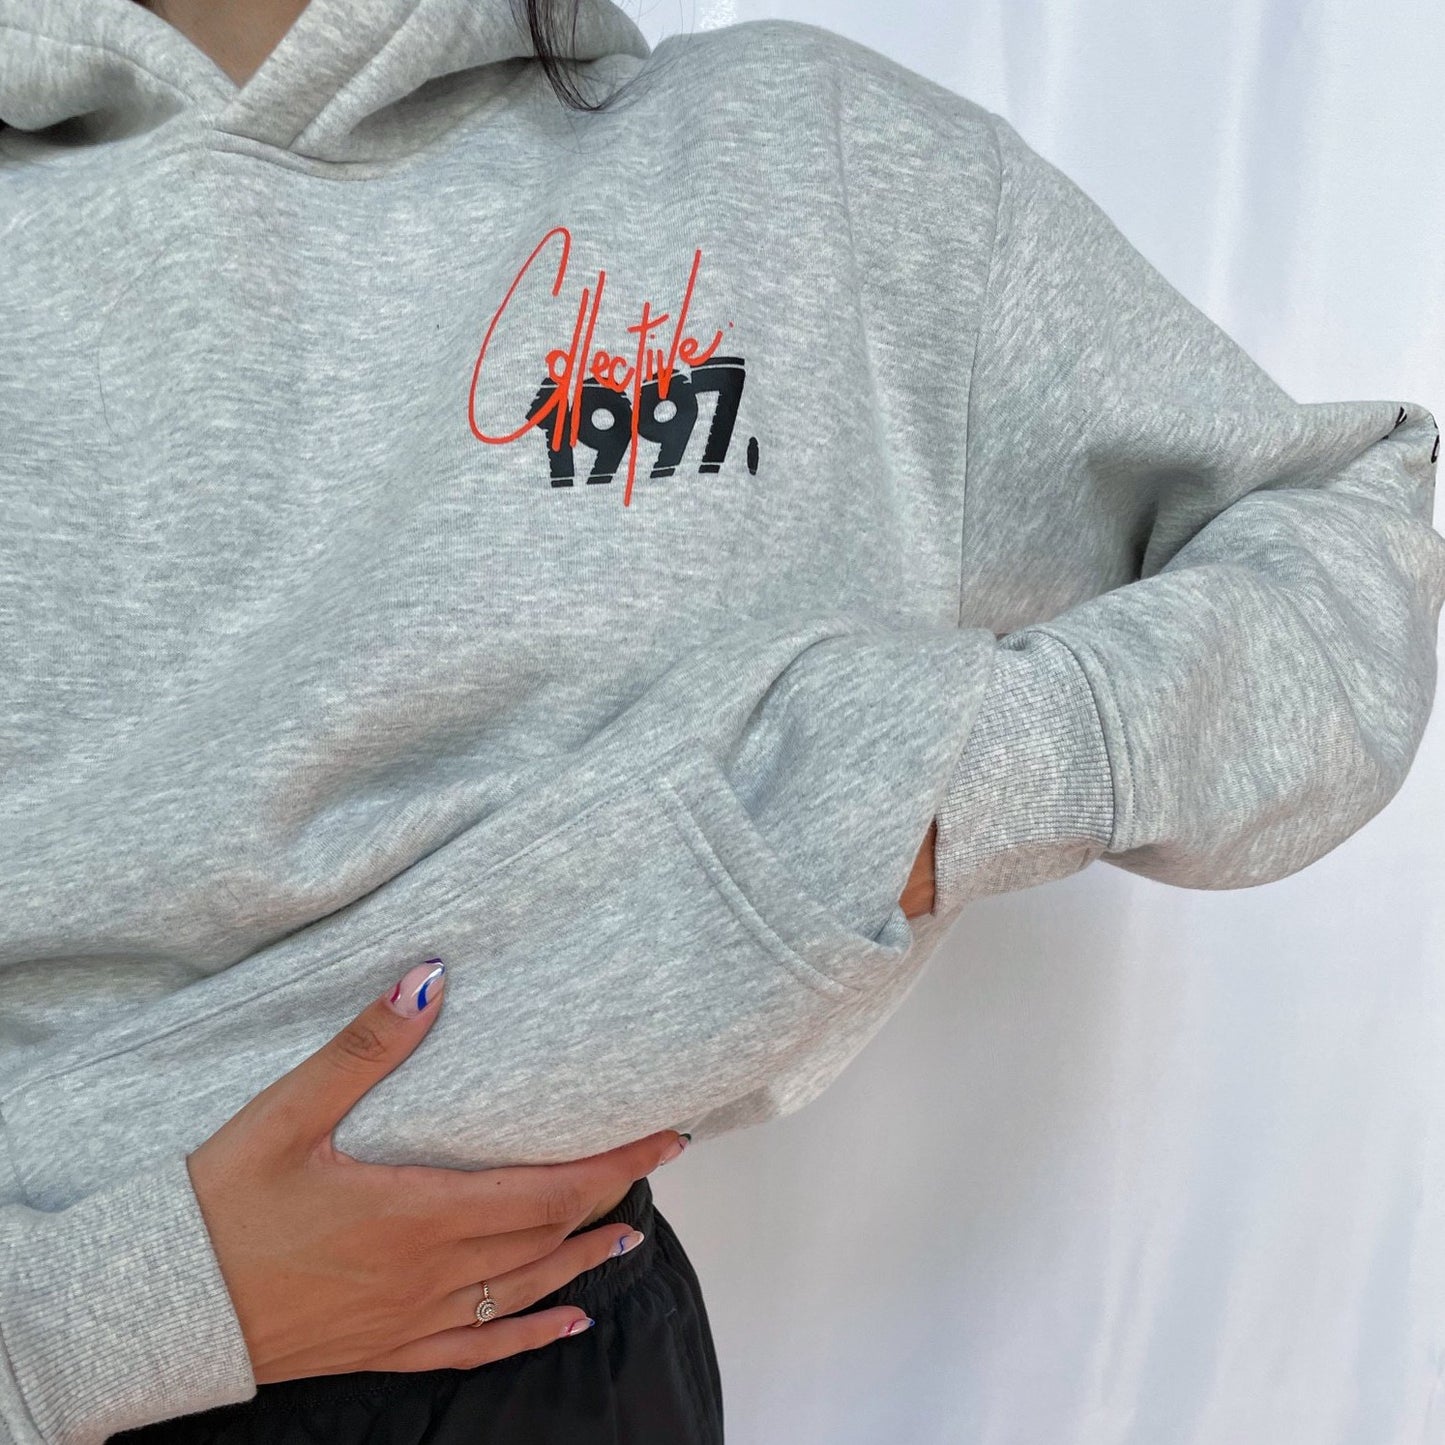 THE '97 HOODIE LIMITED EDITION